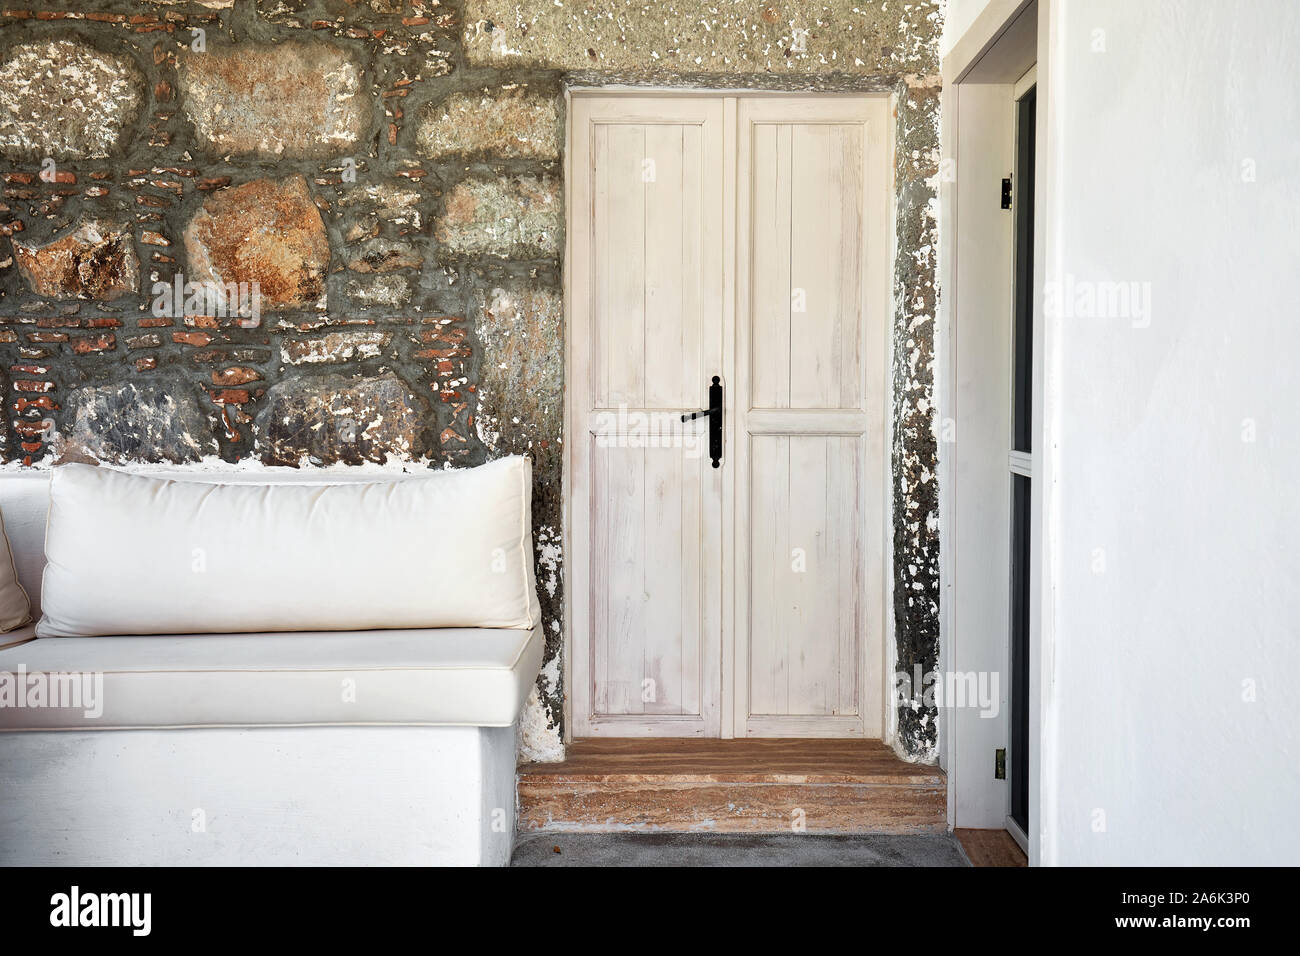 White wooden door and the entrance patio of a historical Mediterranean stone house Stock Photo